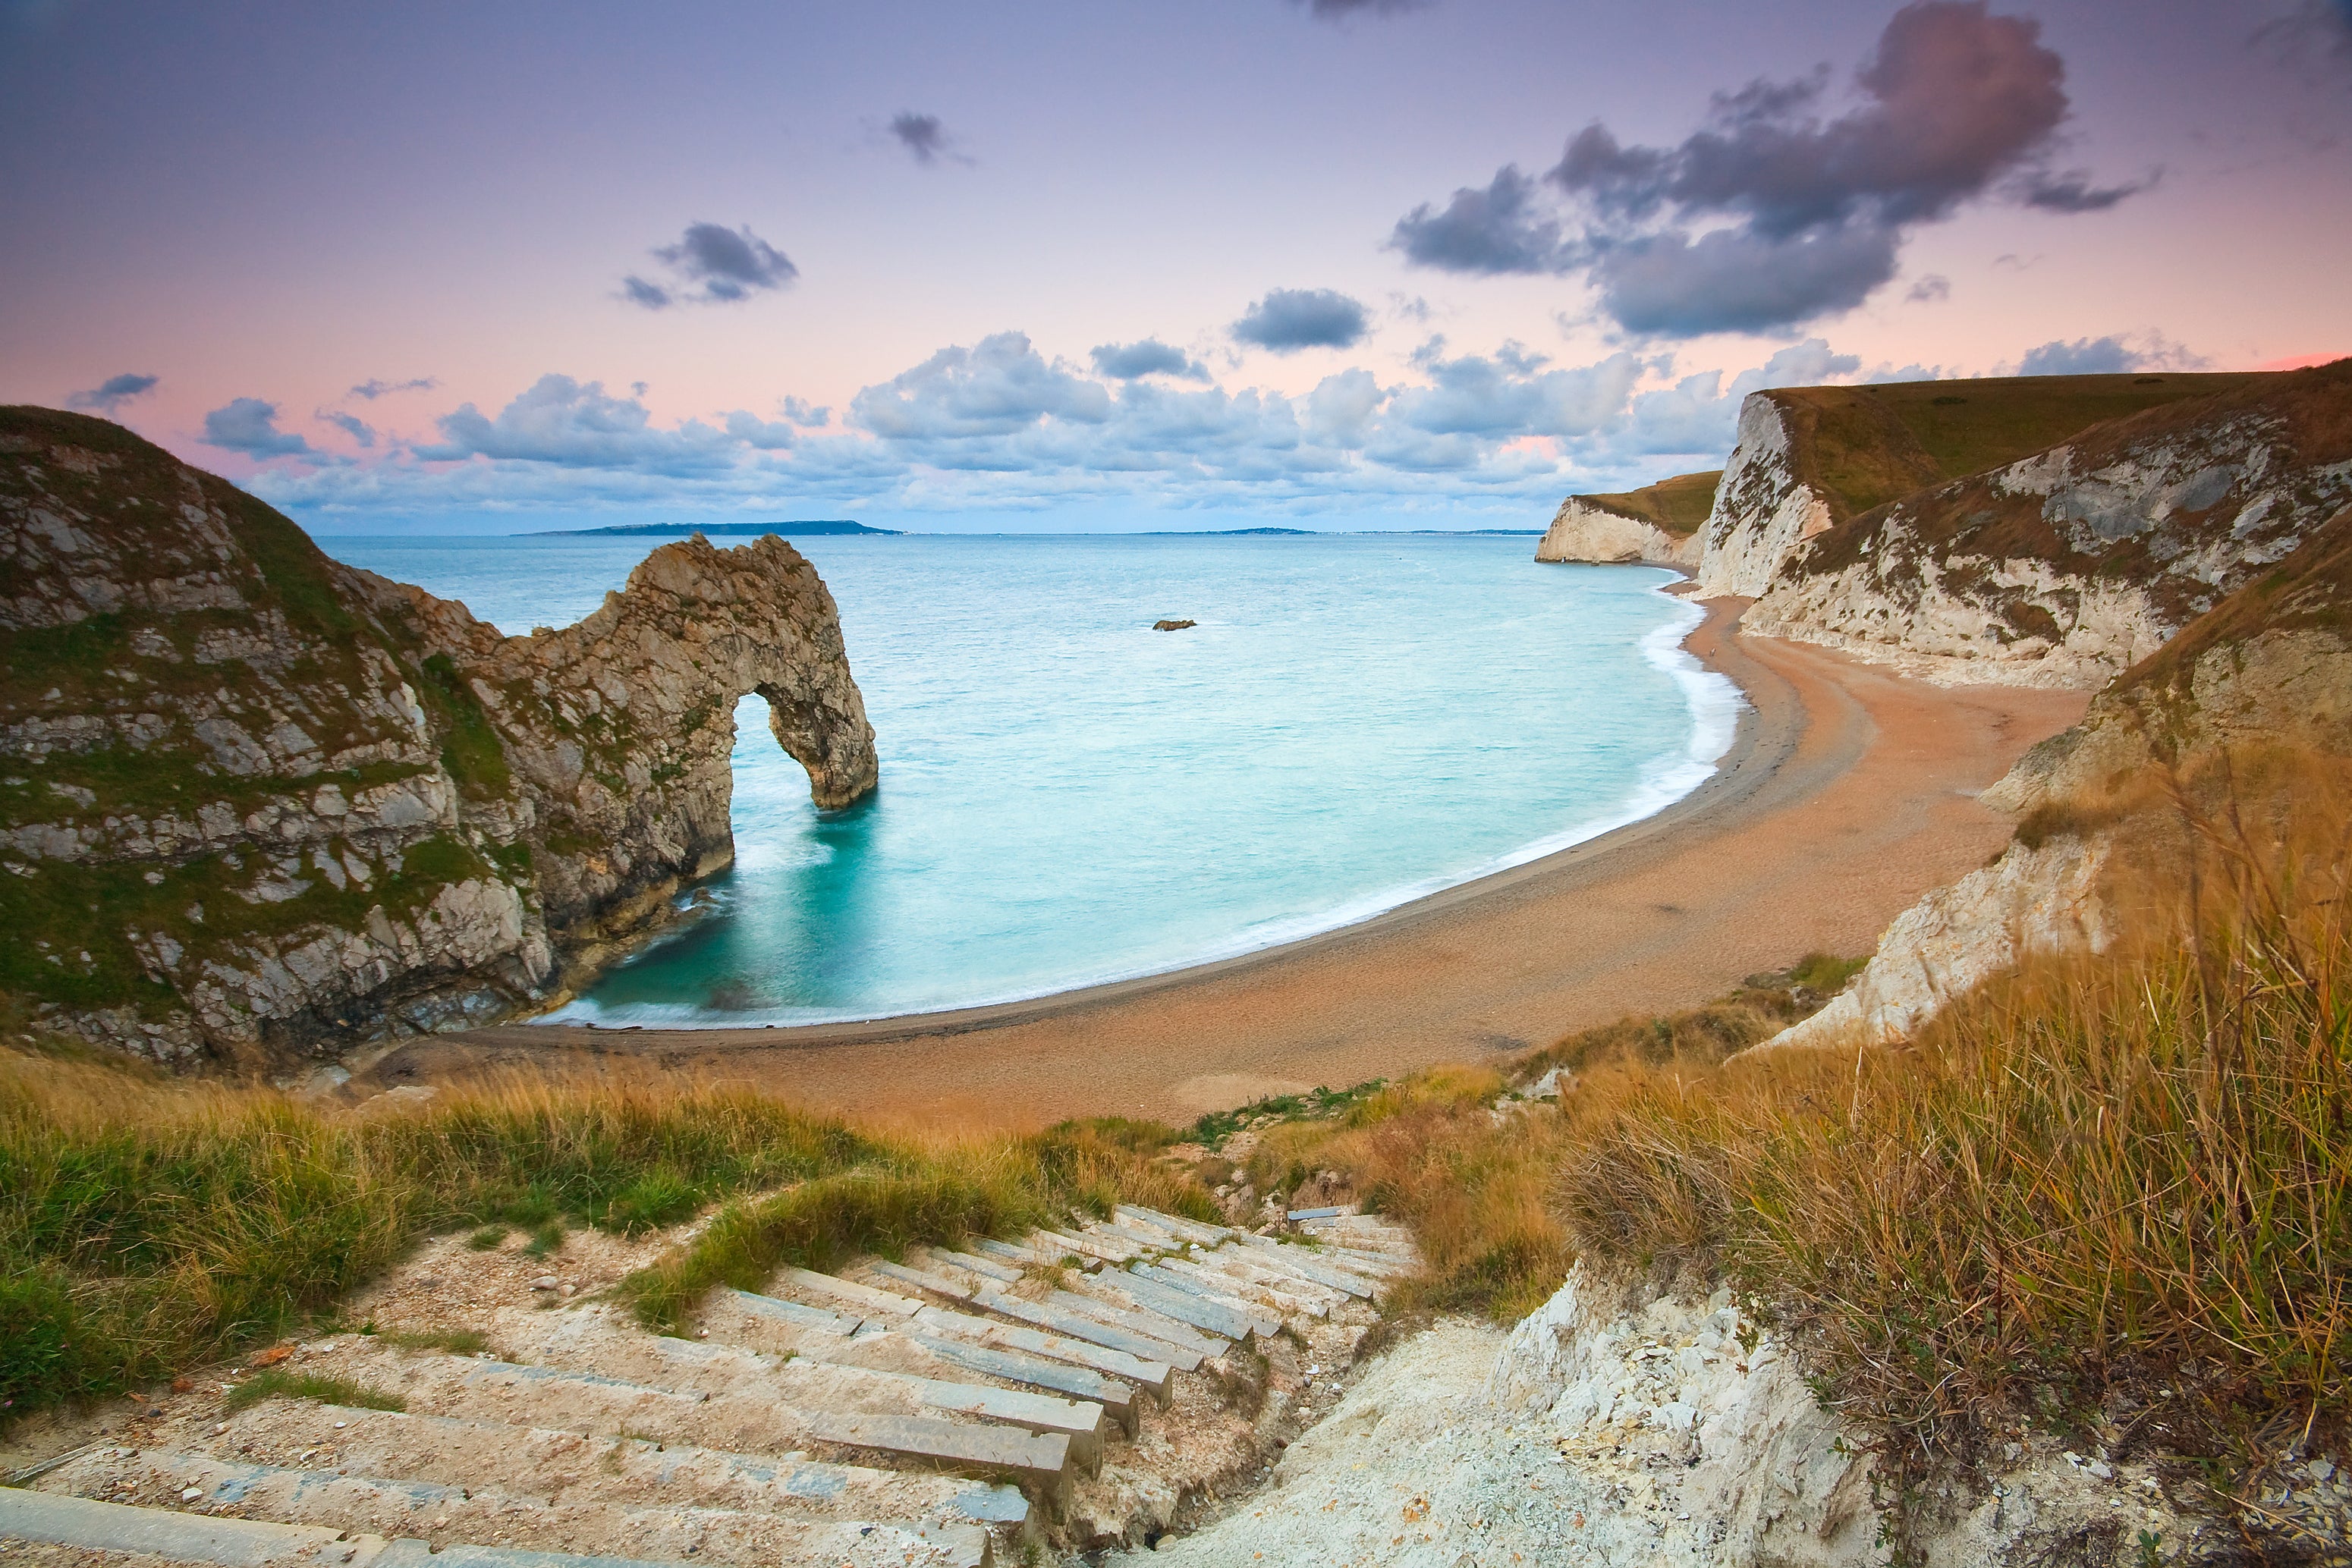 The famous stone archway of Durdle Door